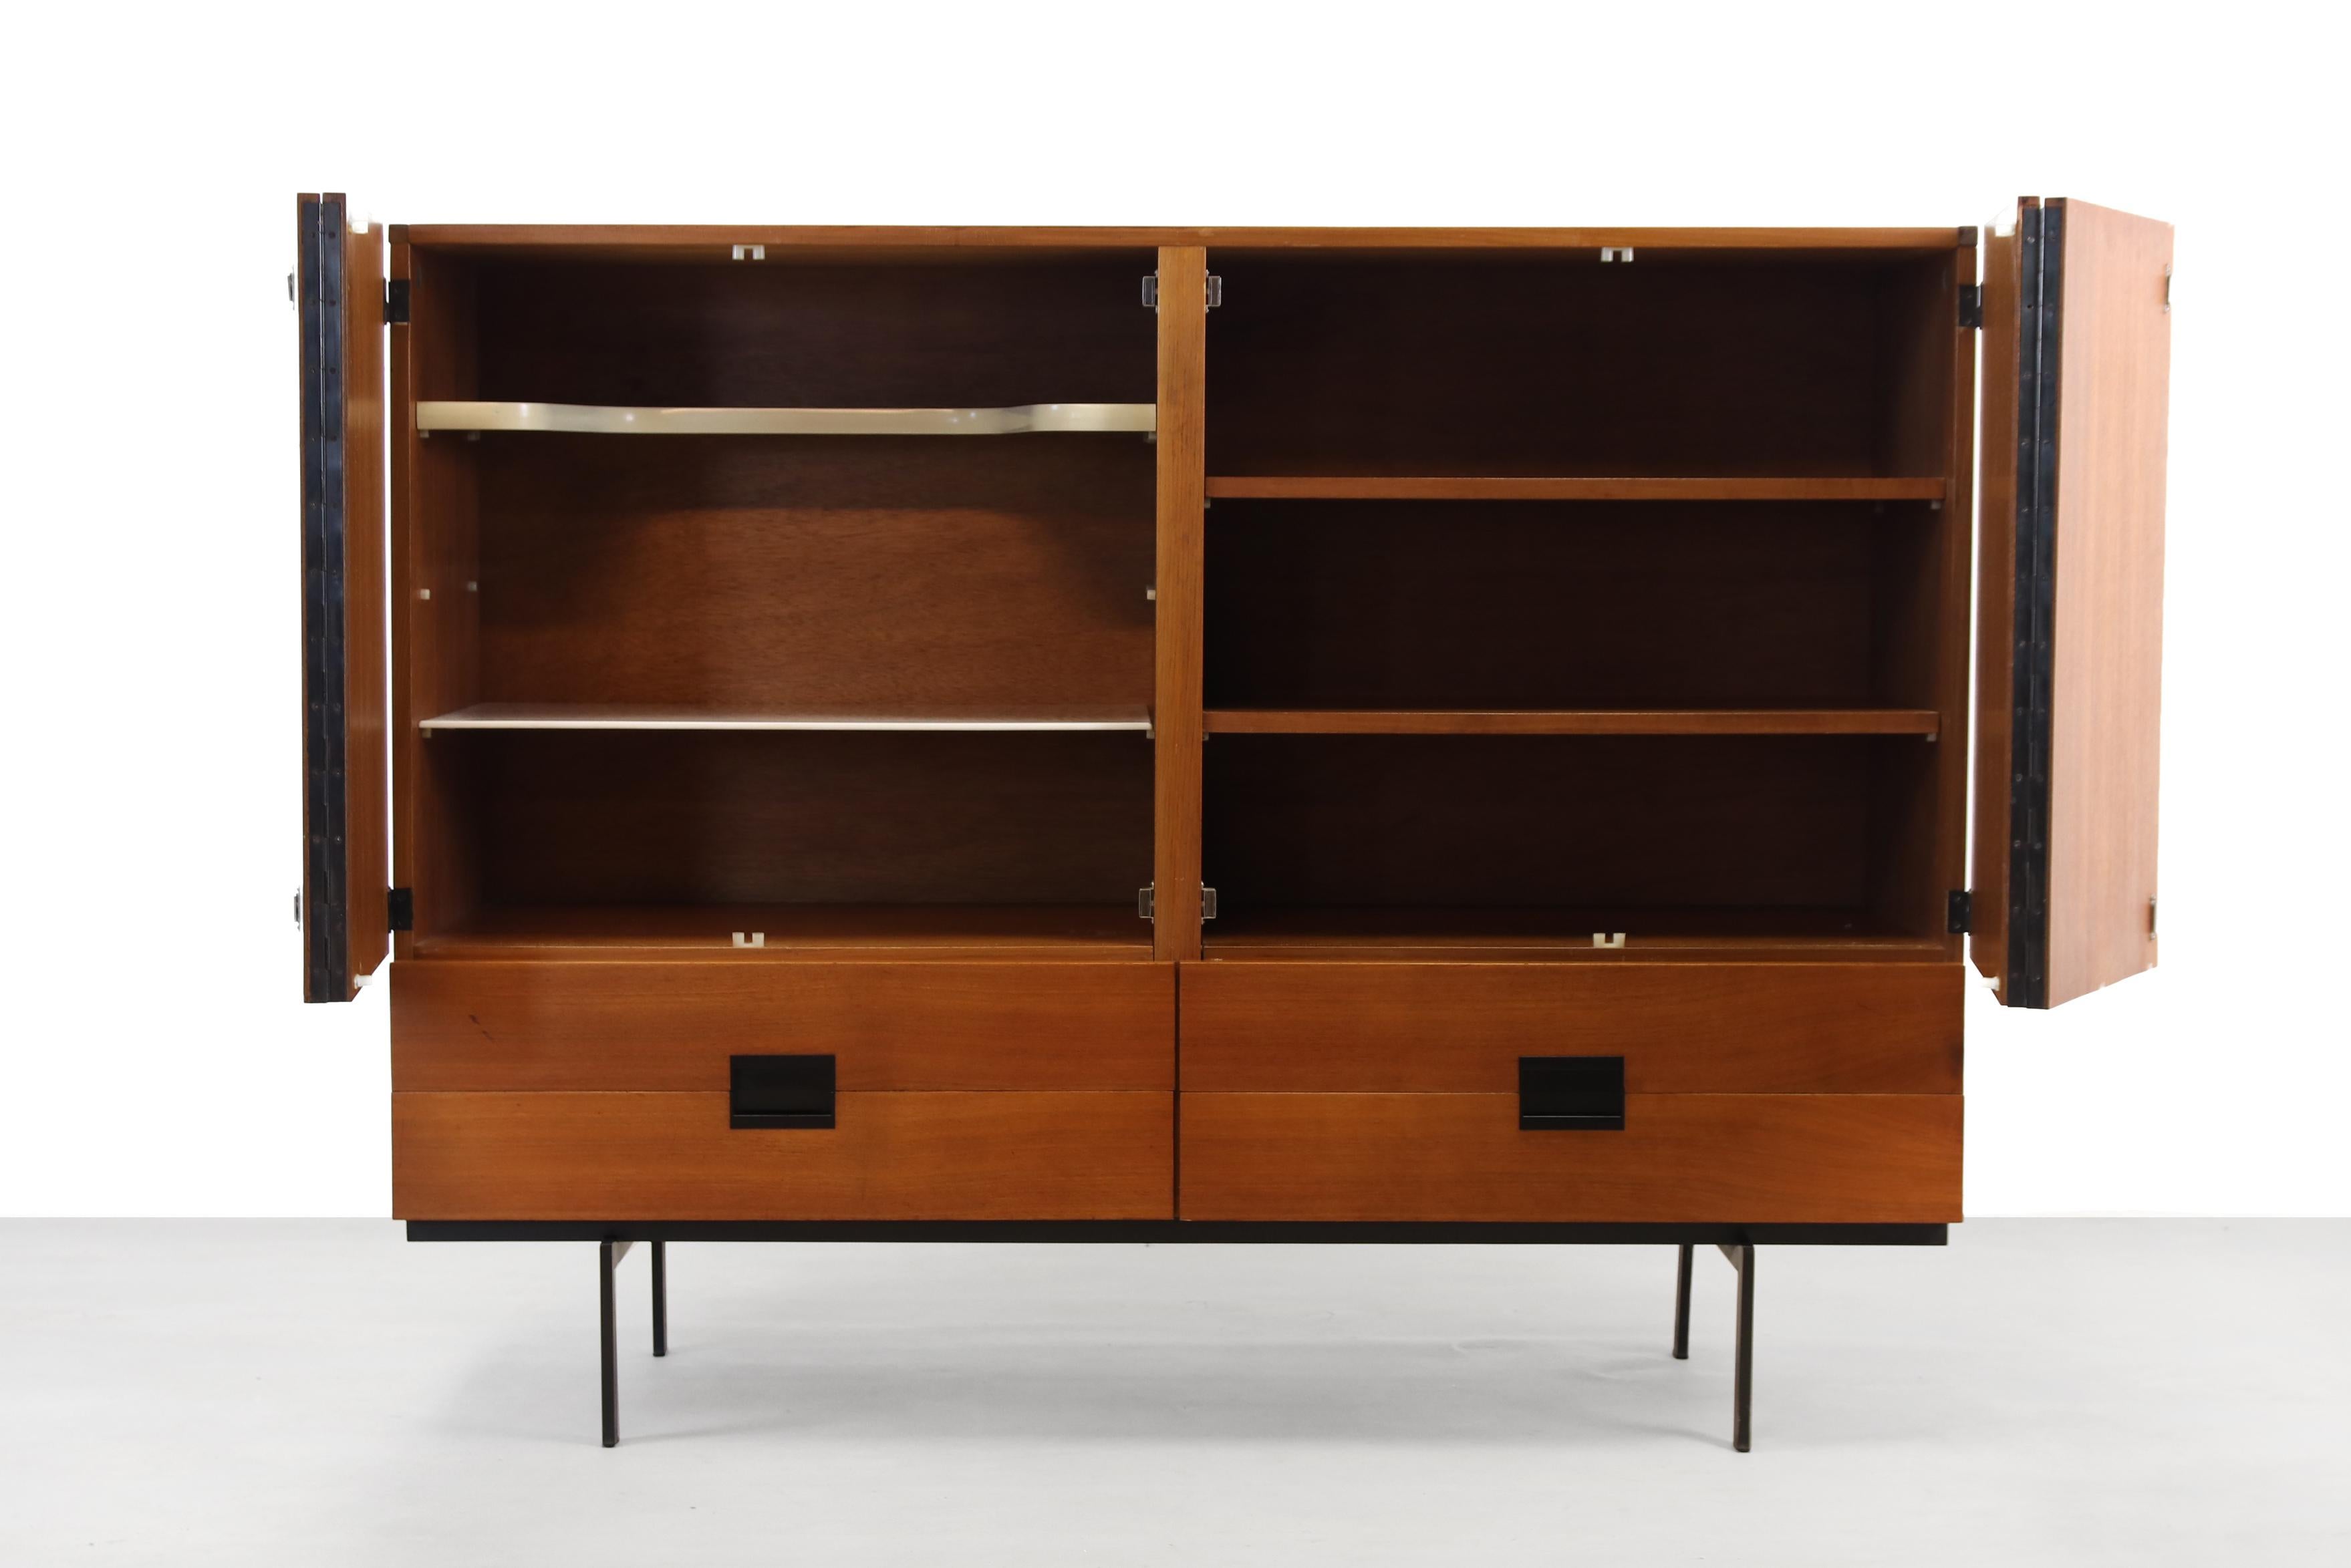 Very nice cabinet from the Japanese series by Cees Braakman manufactured by Pastoe. This cabinet is not only beautiful but also offers a lot of storage space. The teak cabinet has a beautiful drawing and a golden glow in the wood, and the iconic